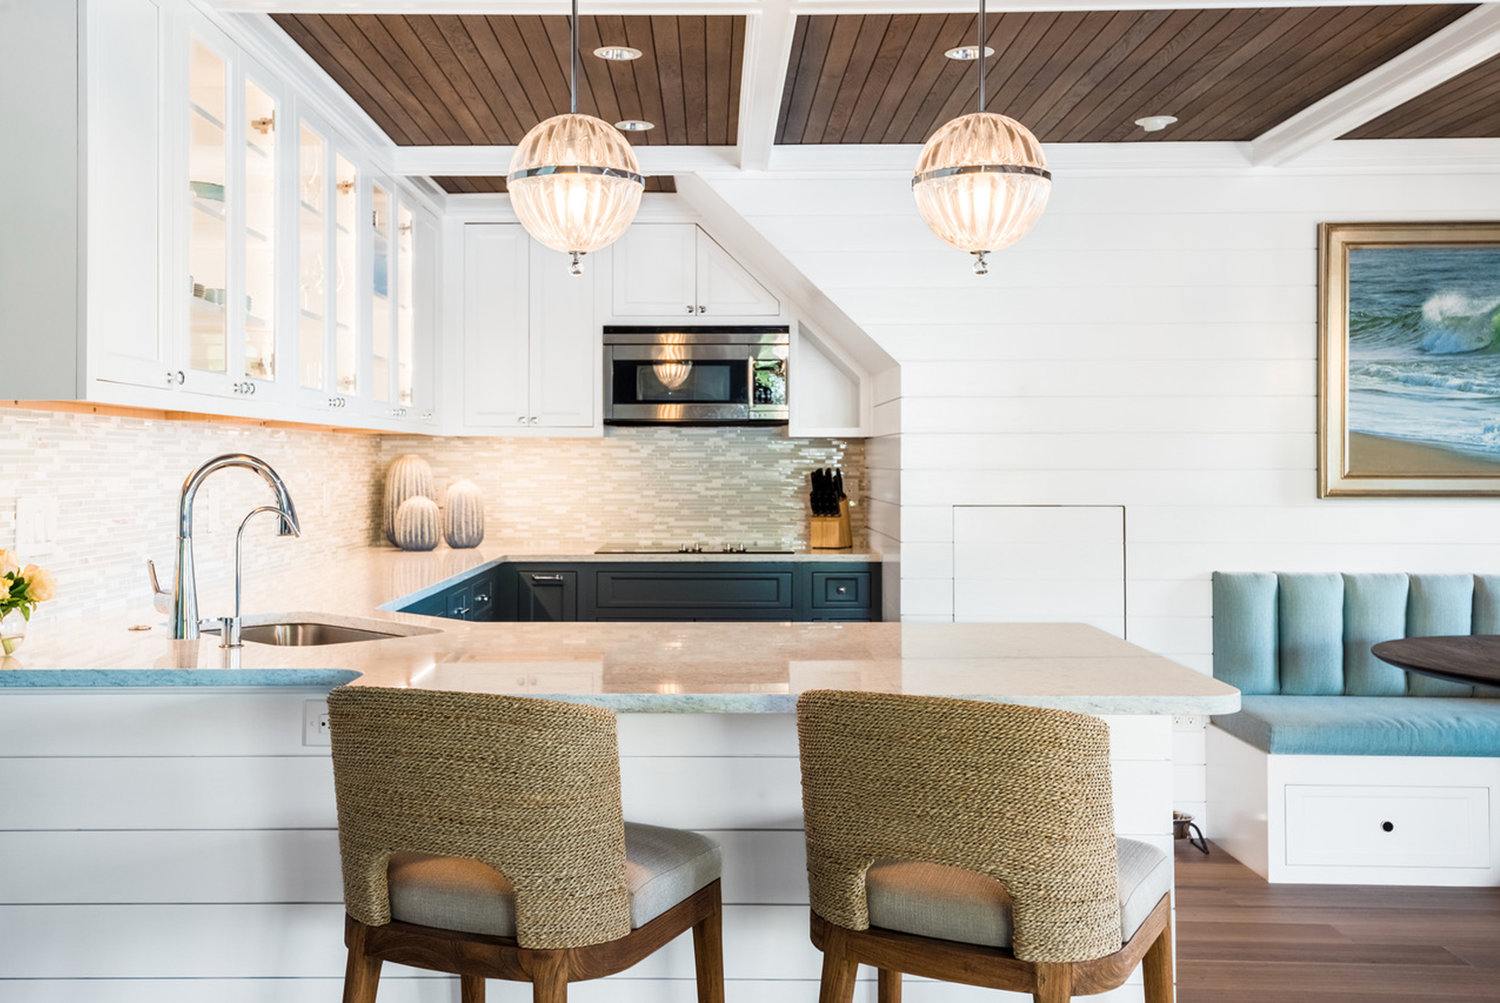 A pair of globe pendant fixtures serves up sophistication in the kitchen